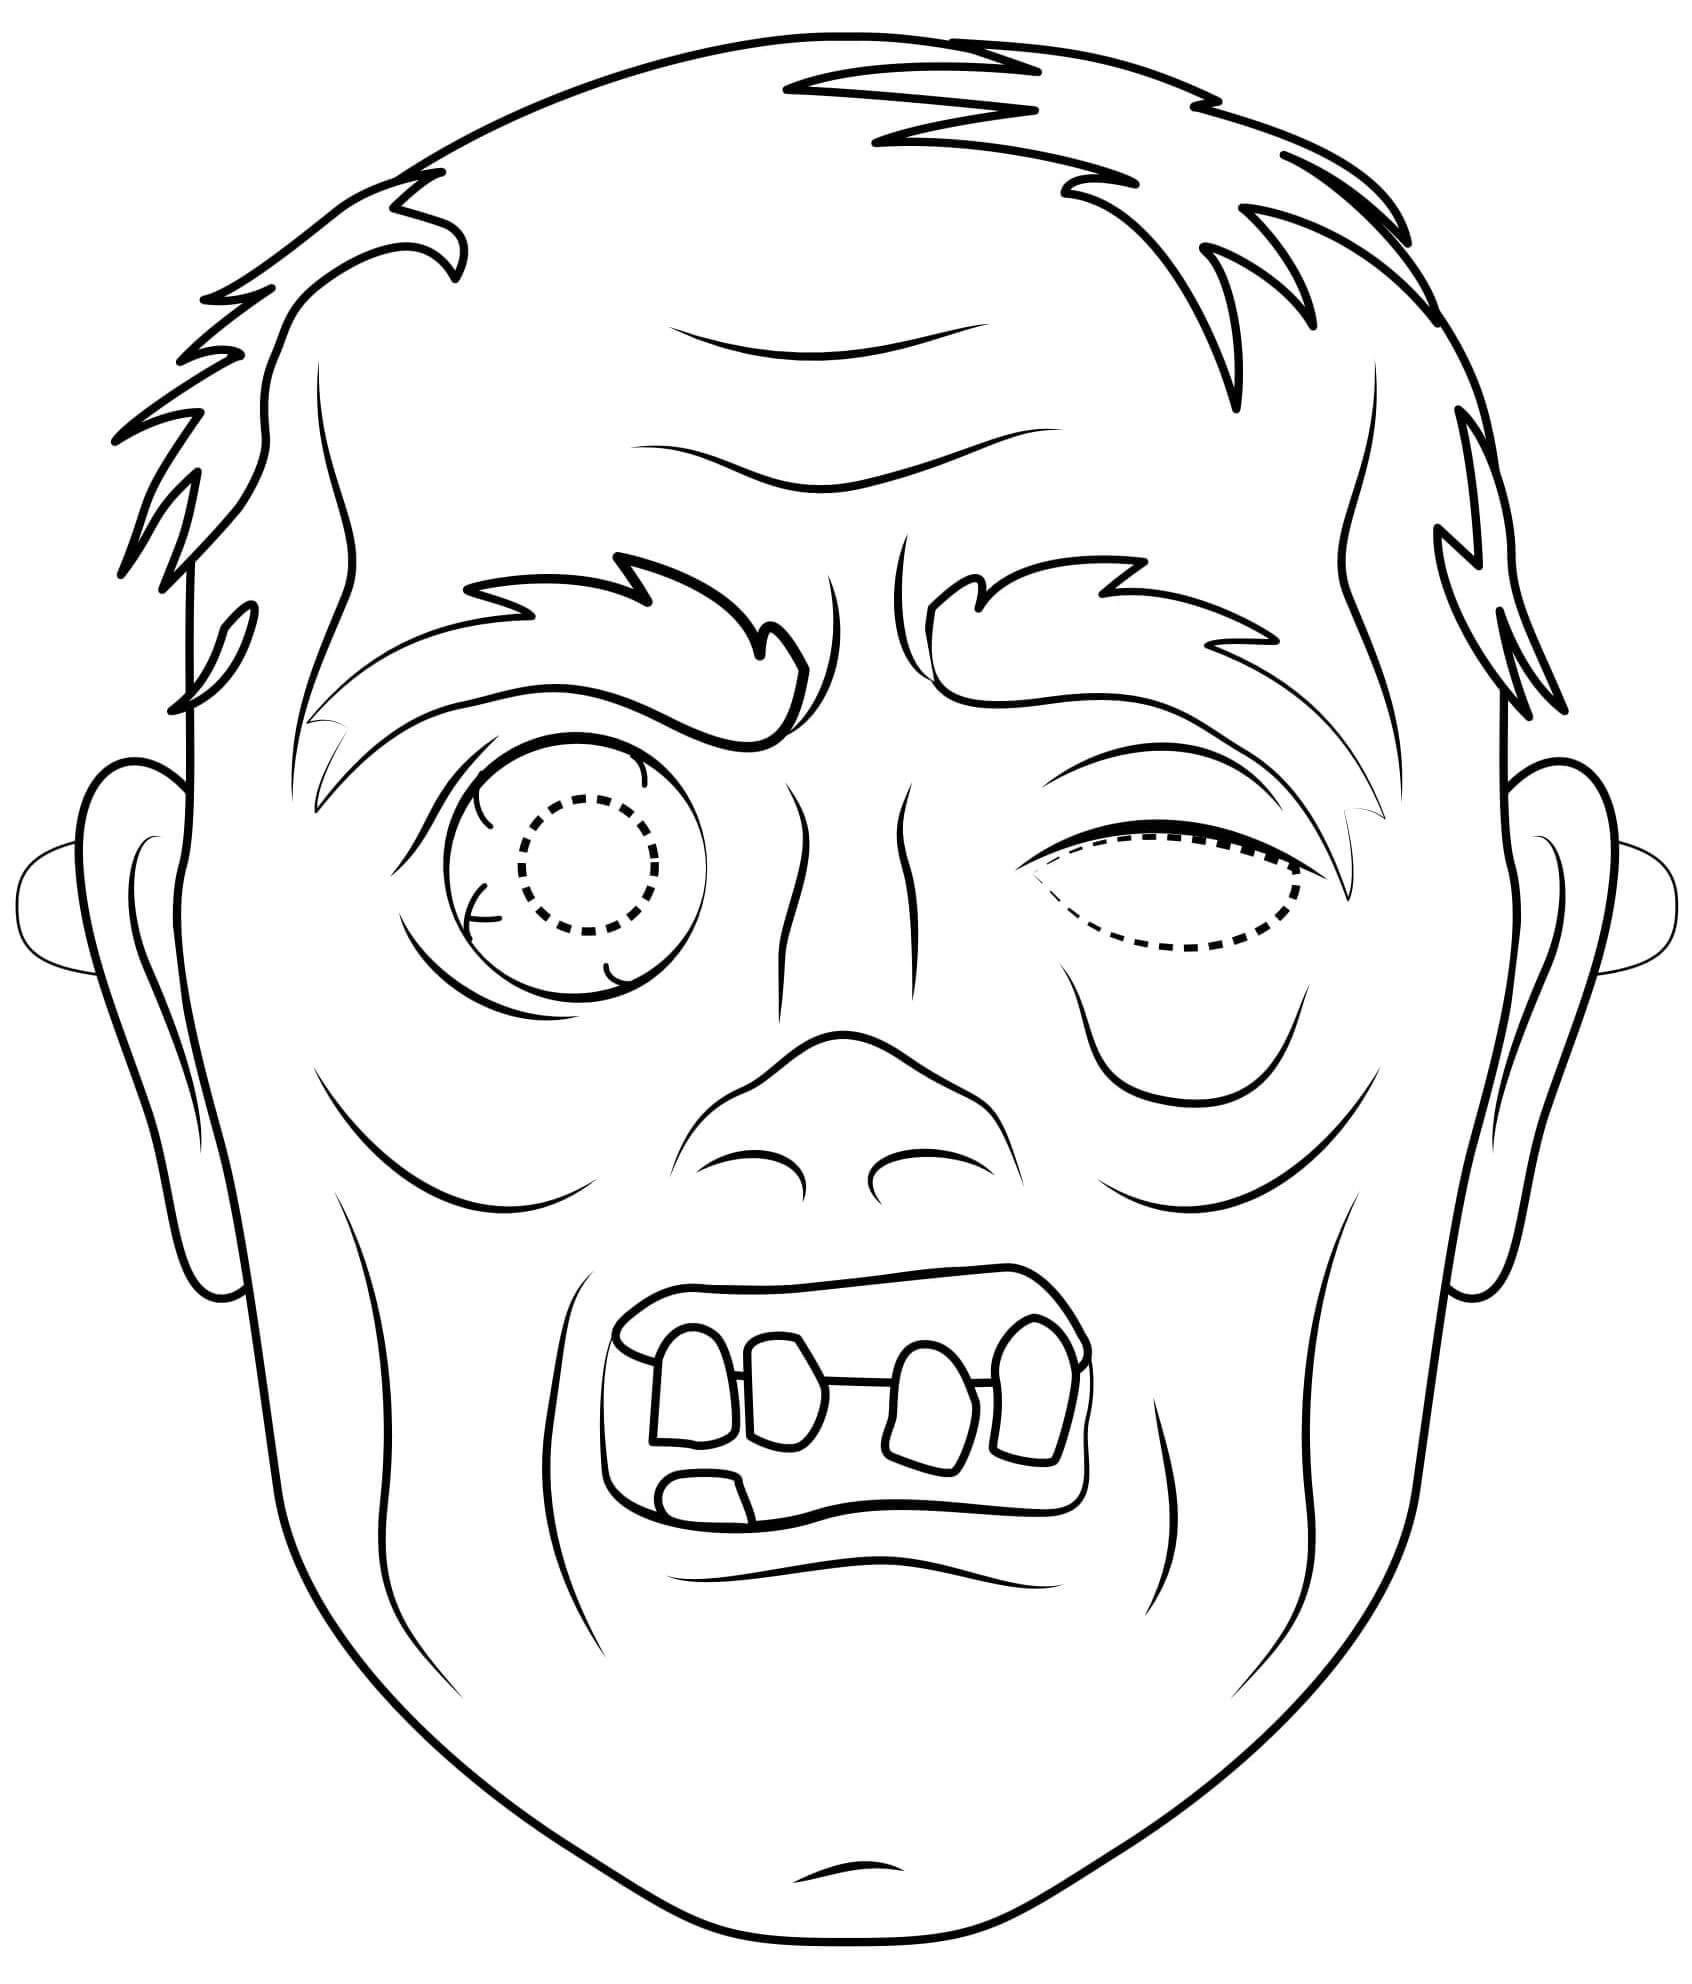 Halloween Mask 3 Coloring Page